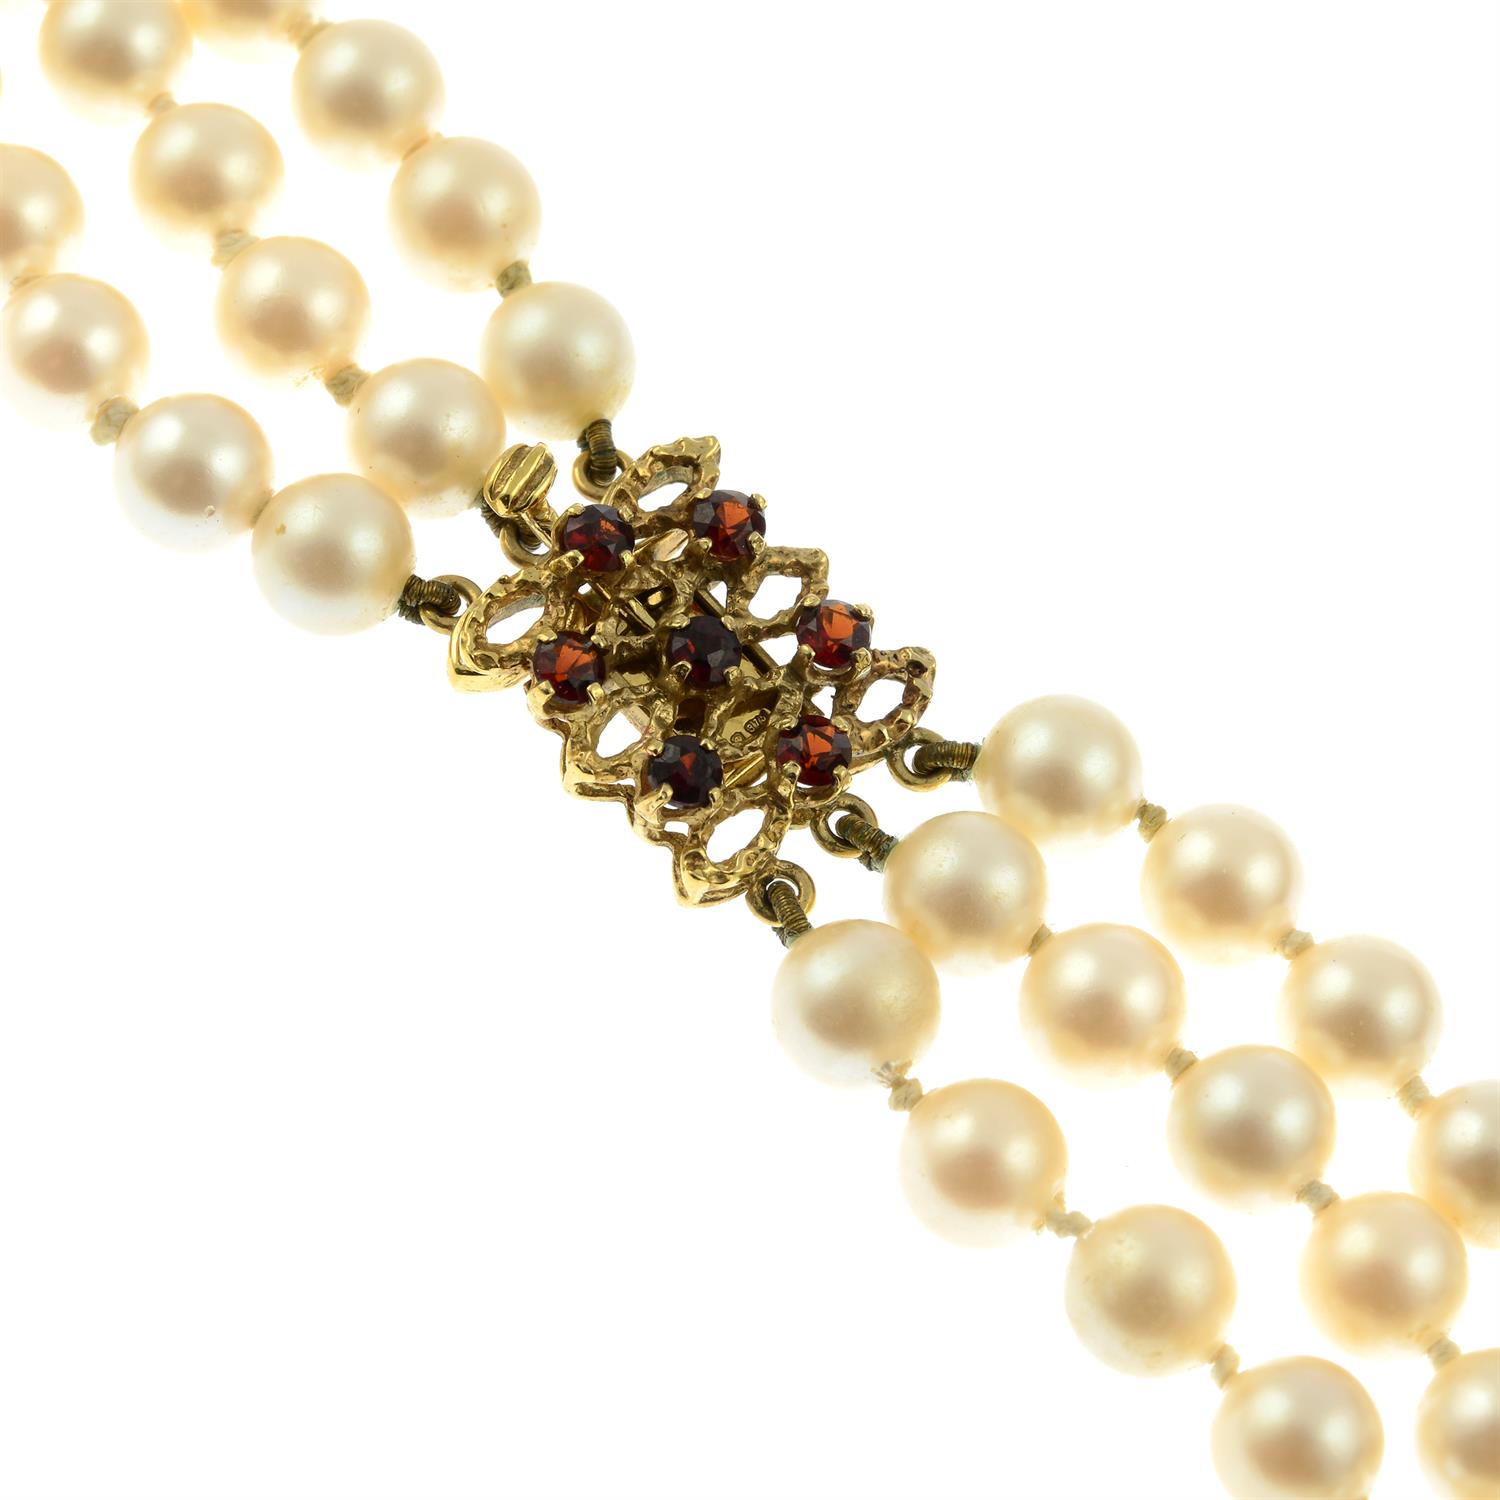 Two imitation pearl necklaces, with 9ct gold clasps.